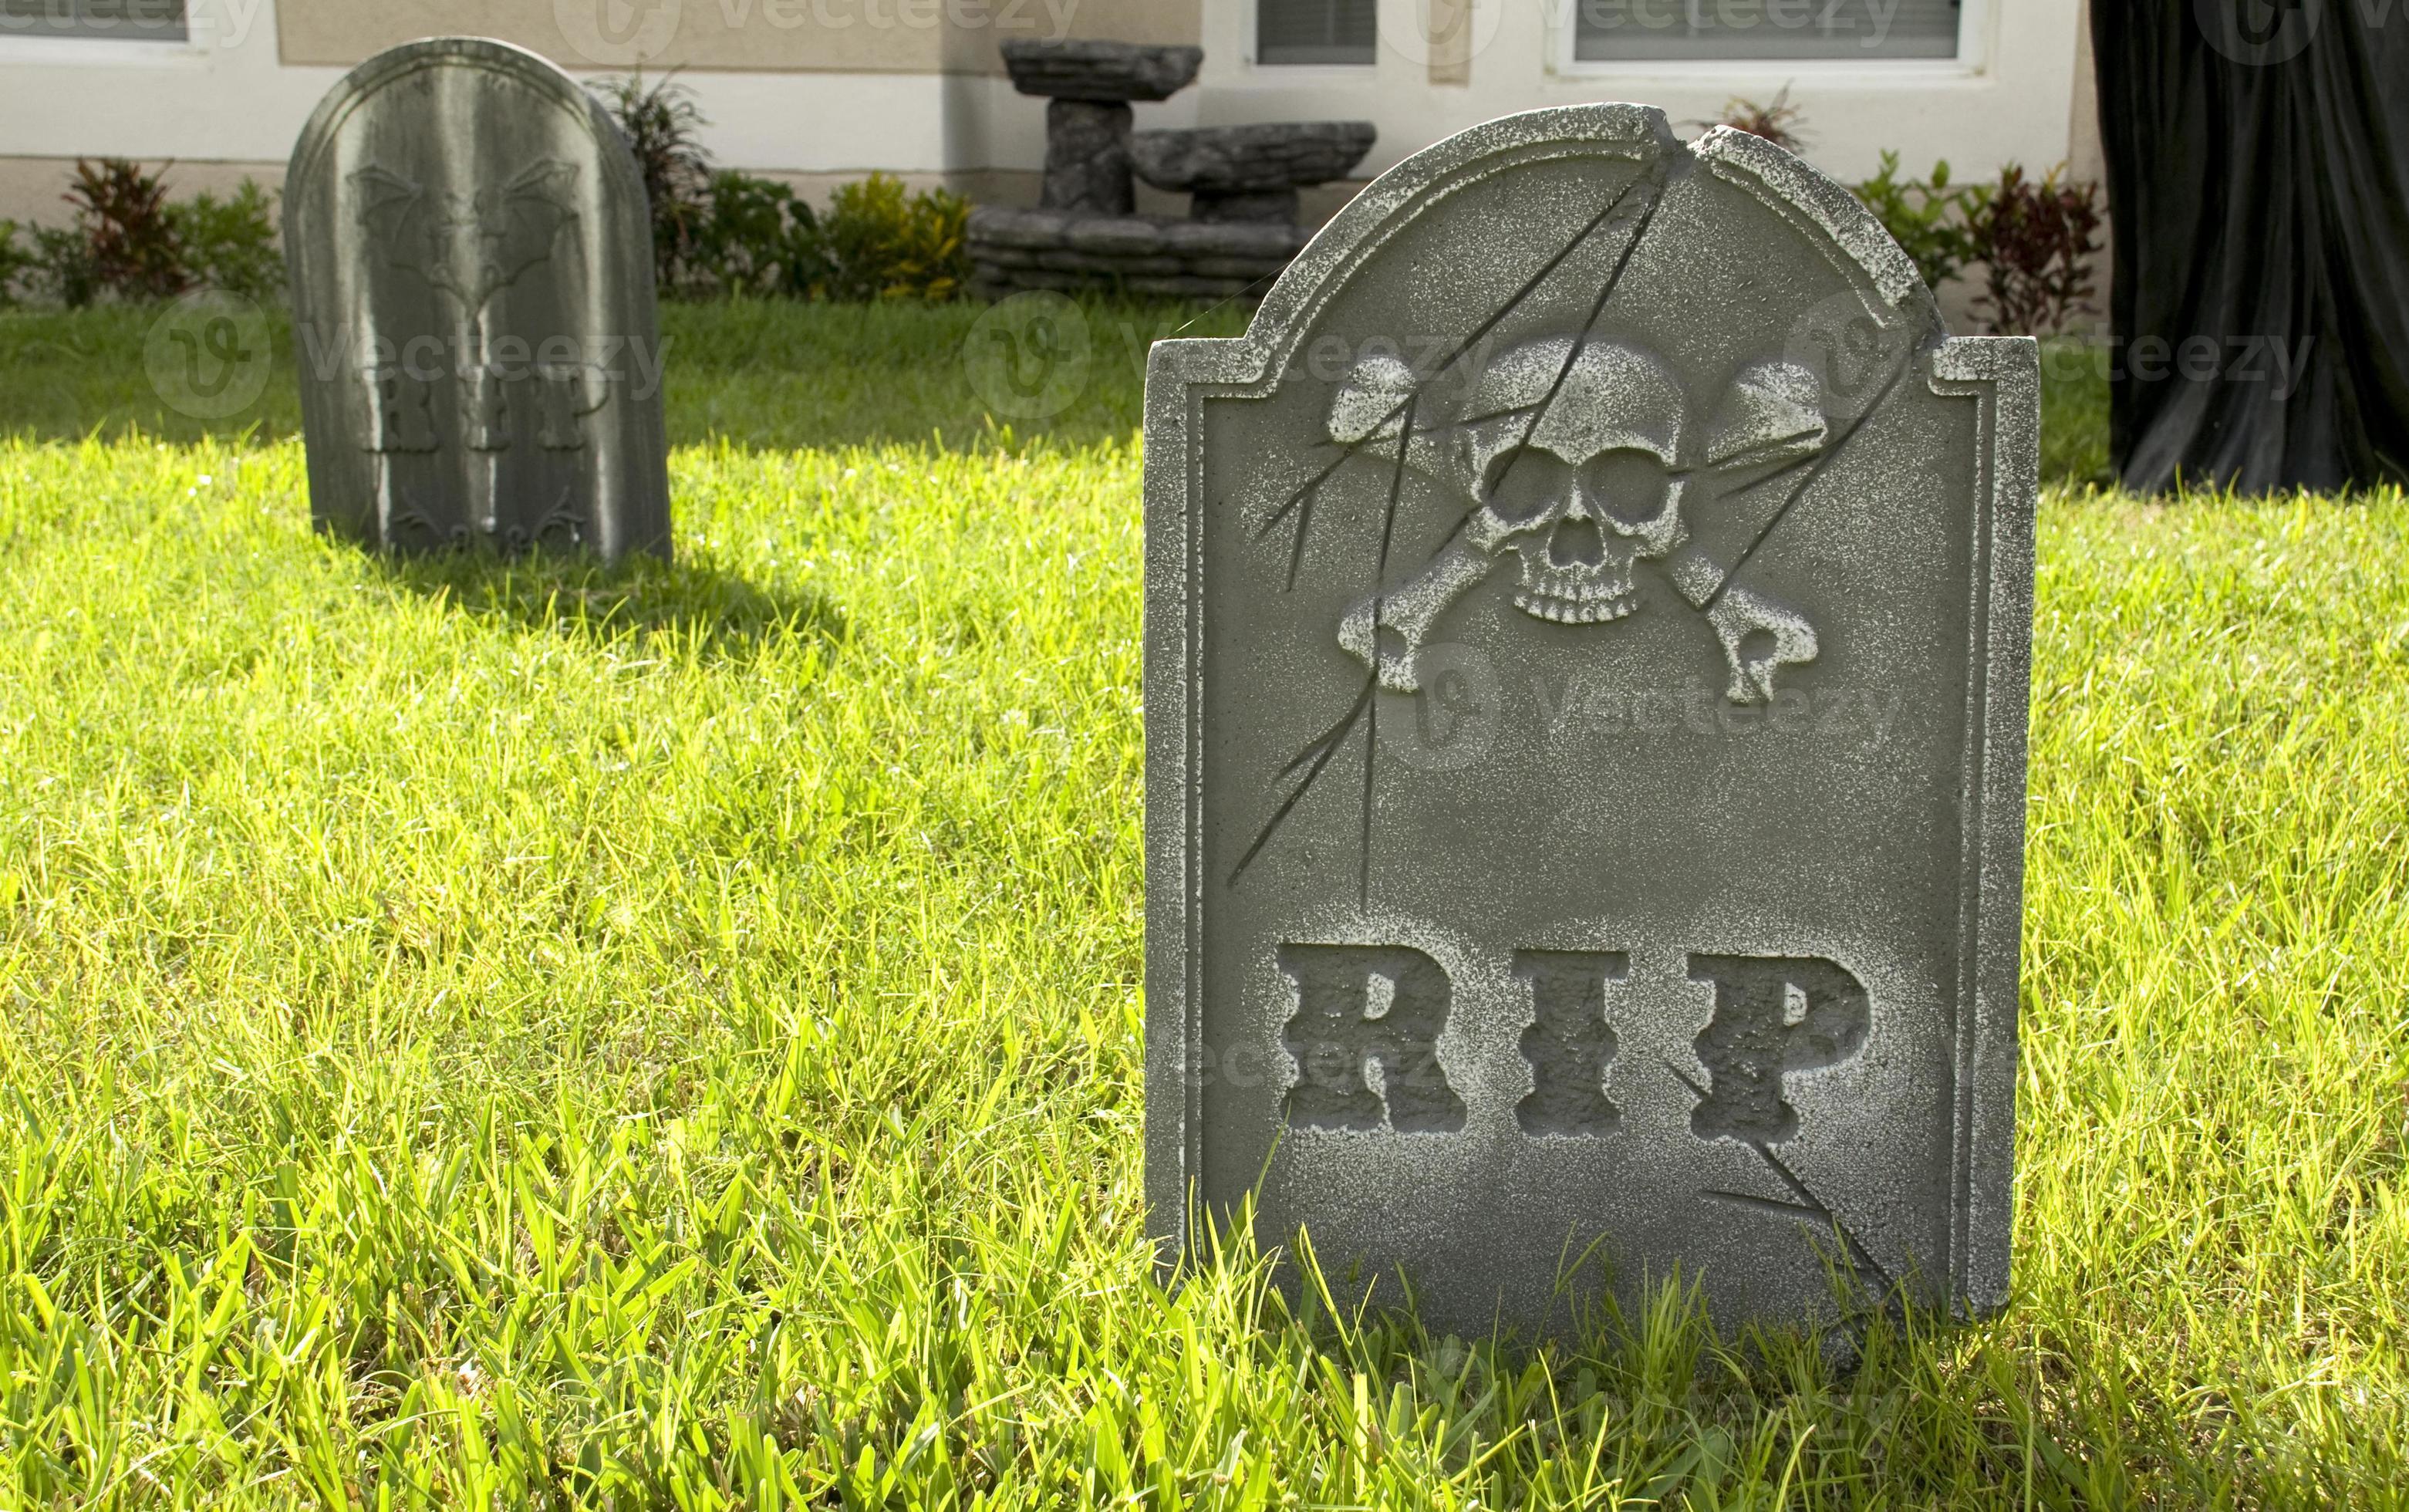 RIP Tombstone on Lawn.